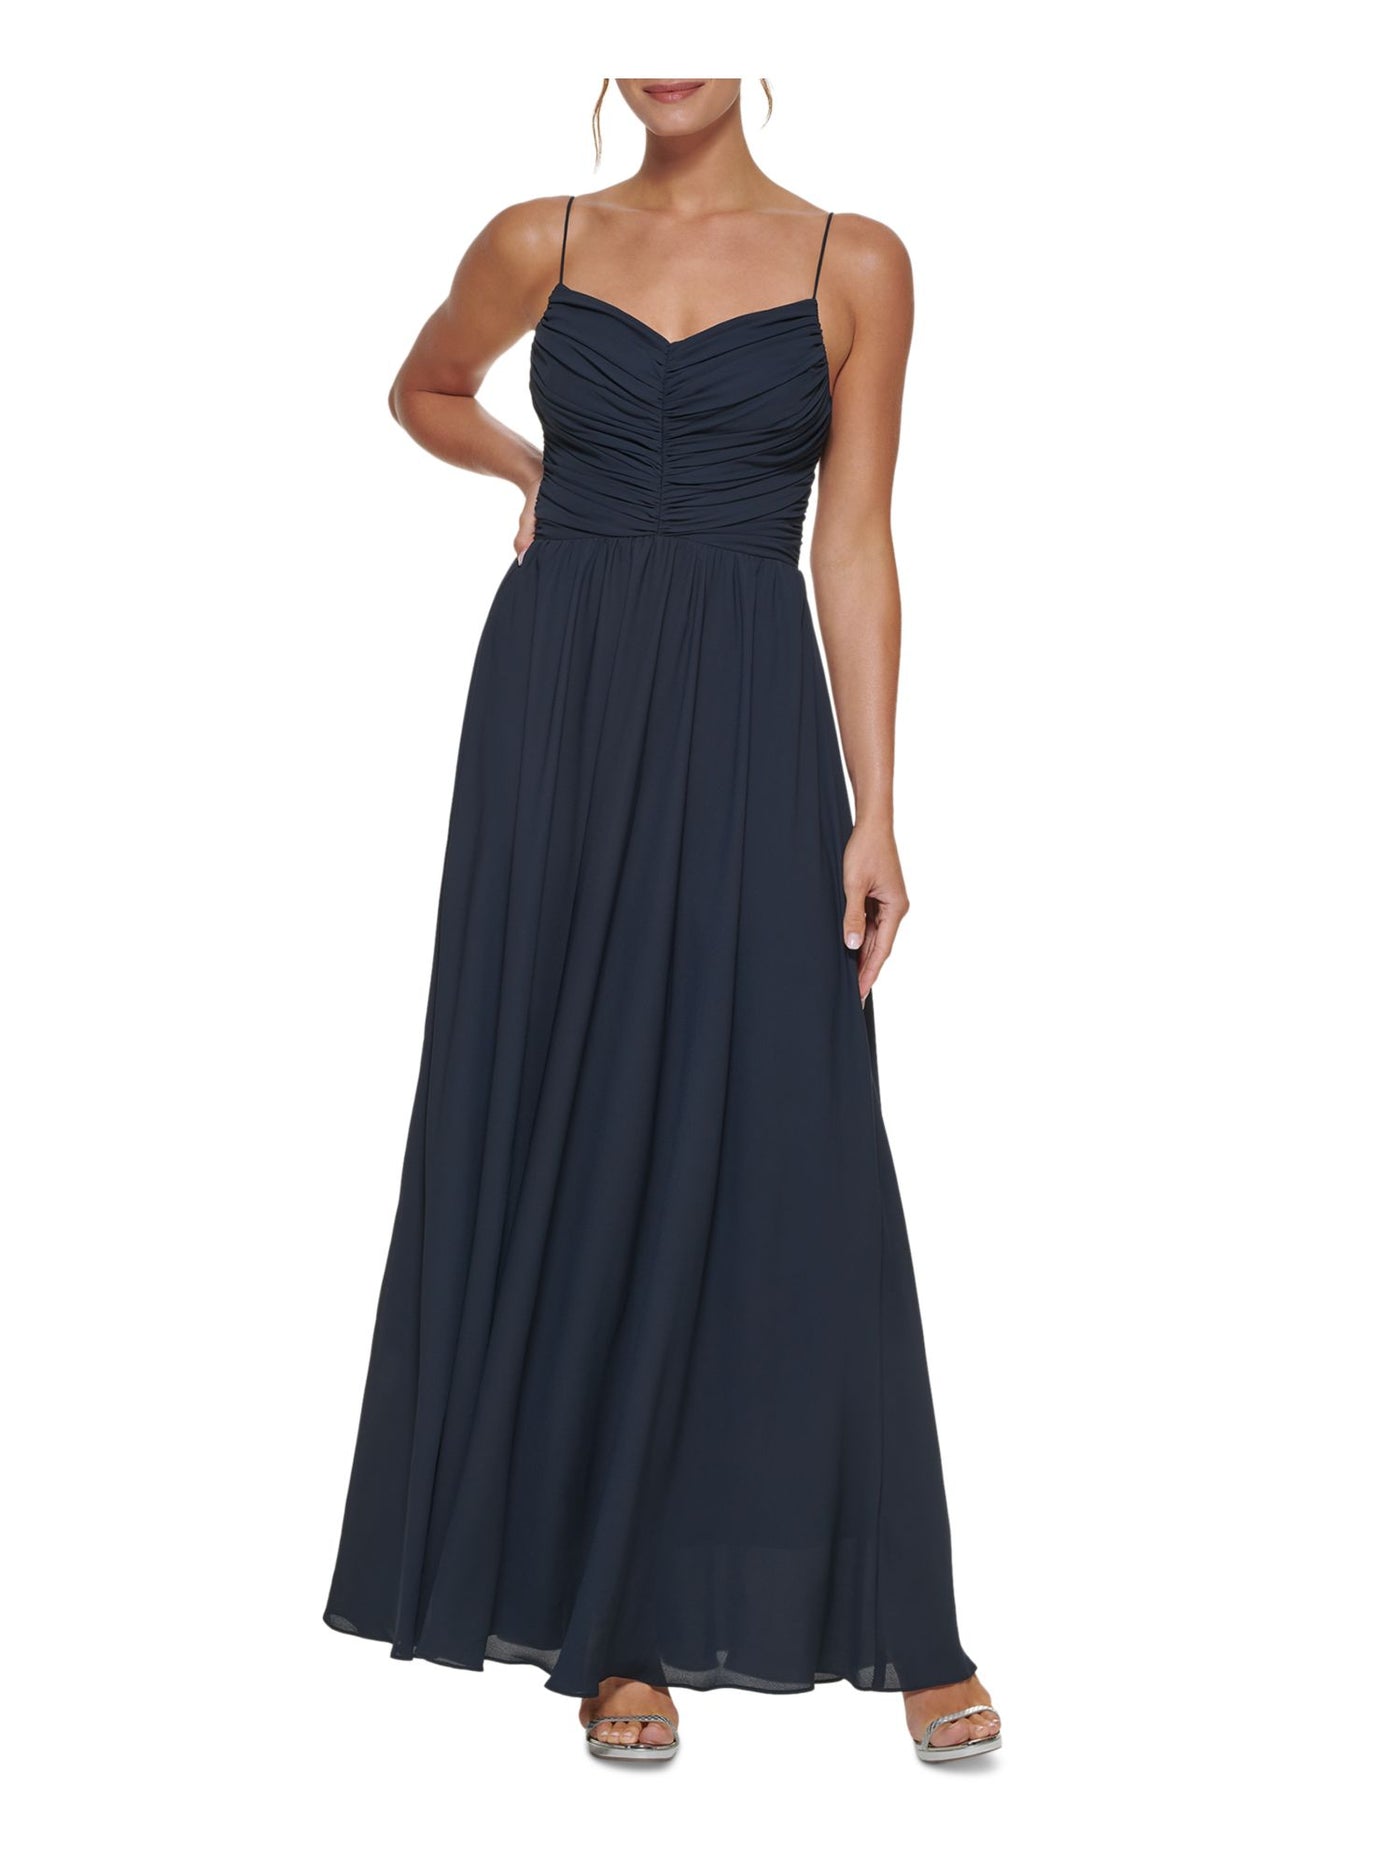 DKNY Womens Navy Ruched Zippered Lined Spaghetti Strap V Neck Full-Length Formal Gown Dress 6